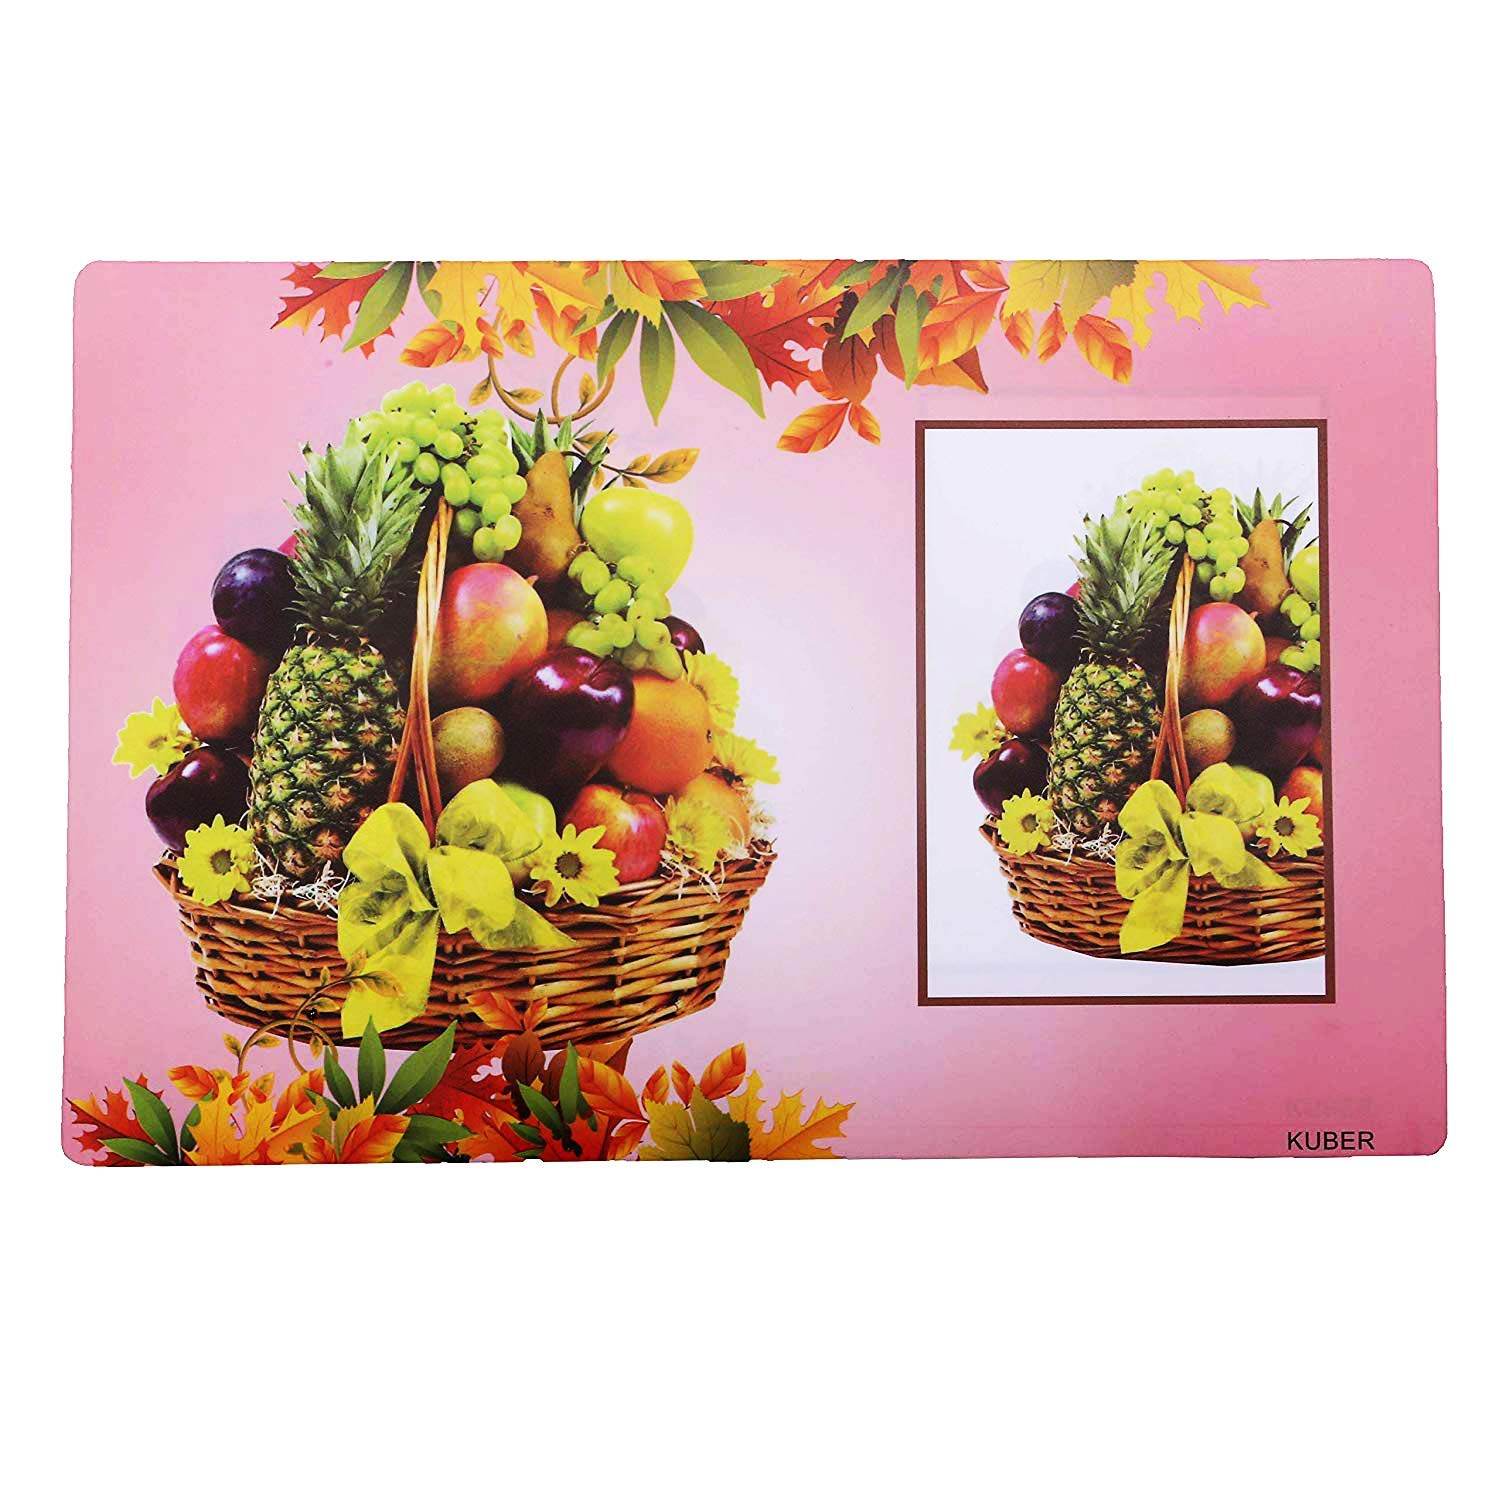 Kuber Industries PVC 3 Pieces Fridge Mats, Handle Cover and Fridge Top Cover (Maroon)-CTKTC14546